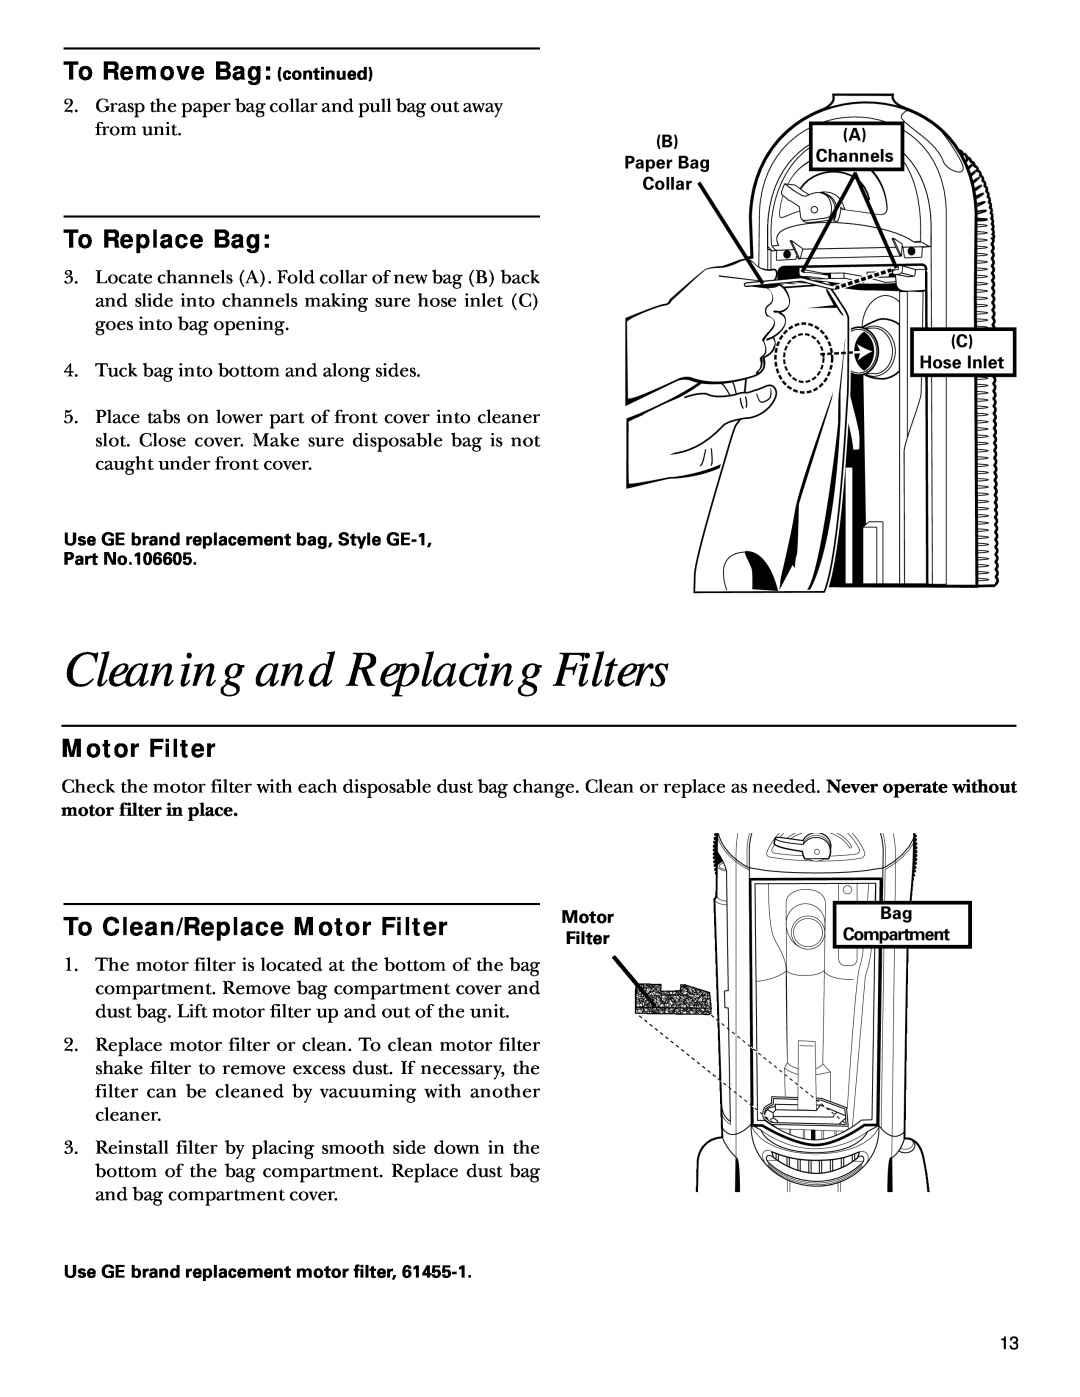 GE 106575 Cleaning and Replacing Filters, To Remove Bag continued, To Replace Bag, Motor Filter, motor filter in place 